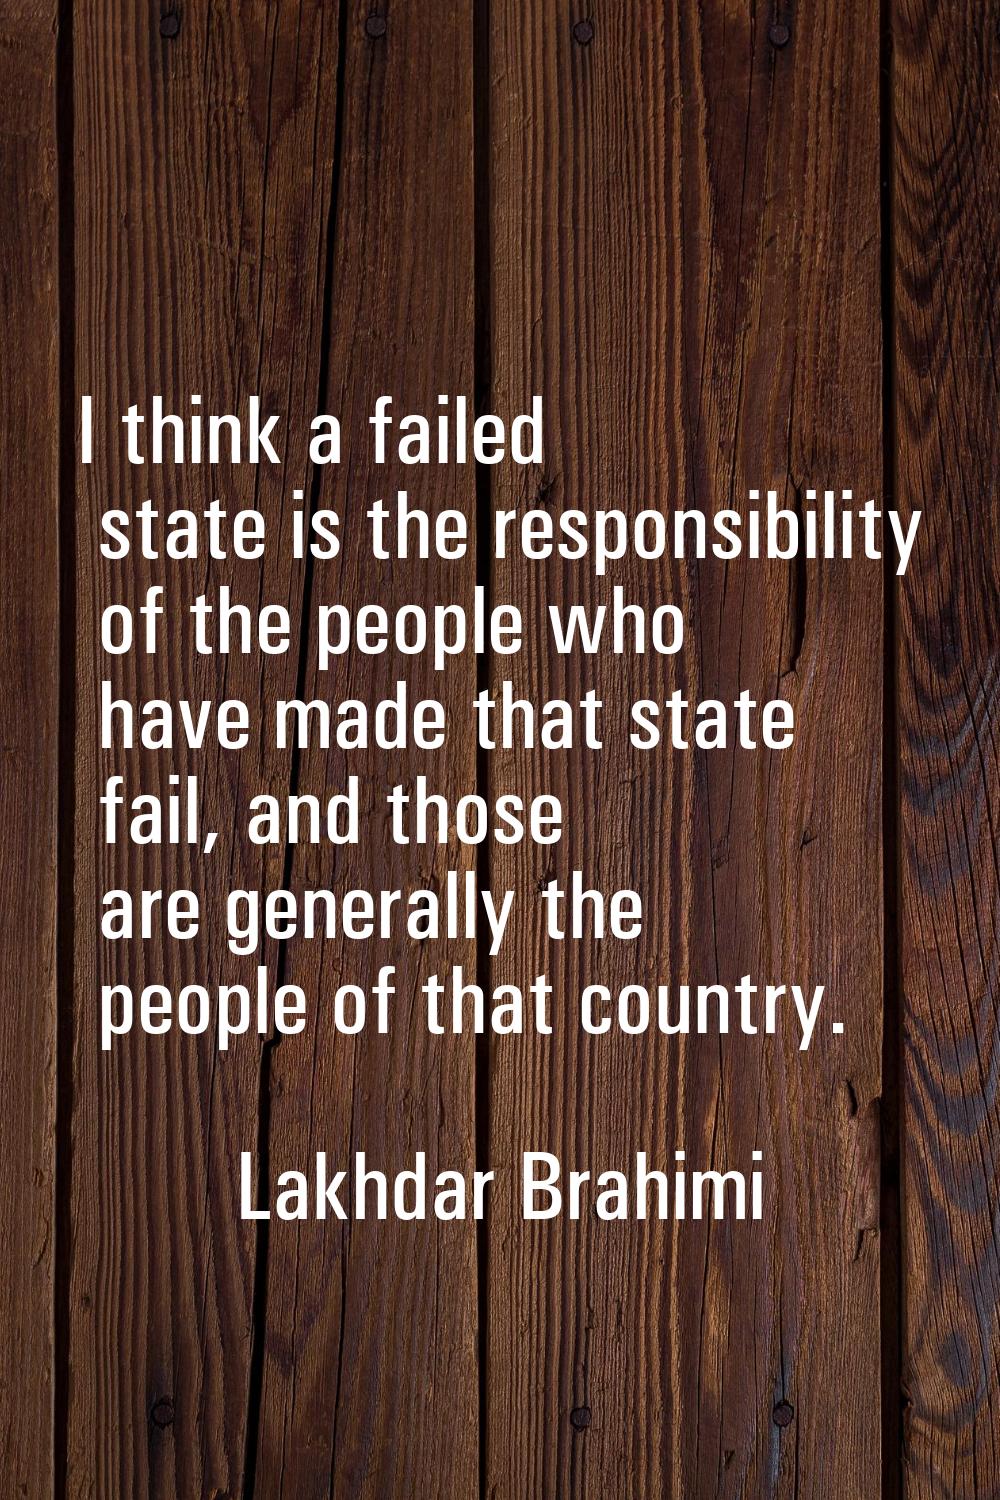 I think a failed state is the responsibility of the people who have made that state fail, and those